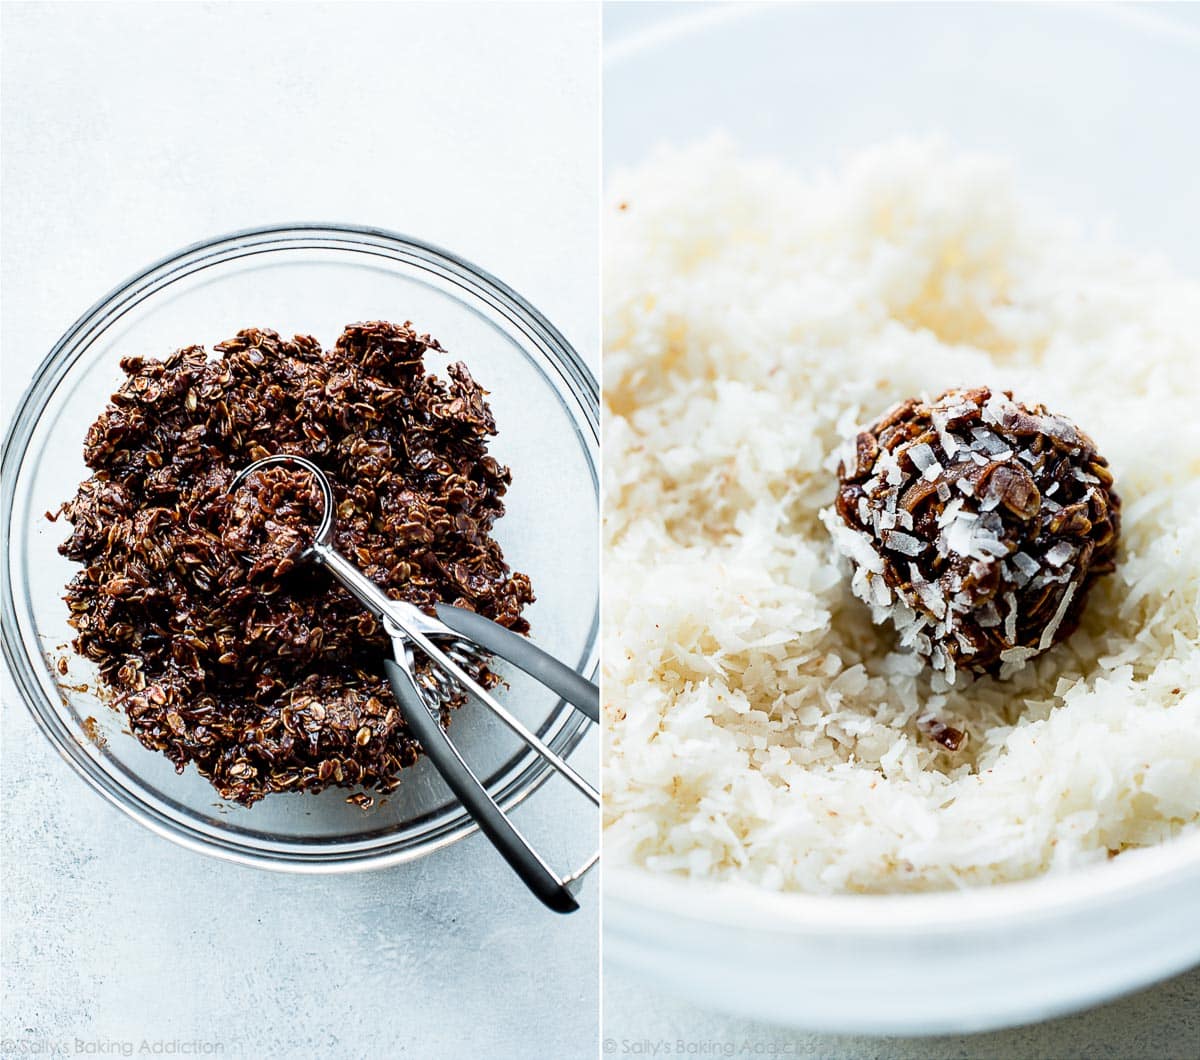 2 images of chocolate oat mixture with a cookie scoop and rolling a chocolate snowball into shredded coconut